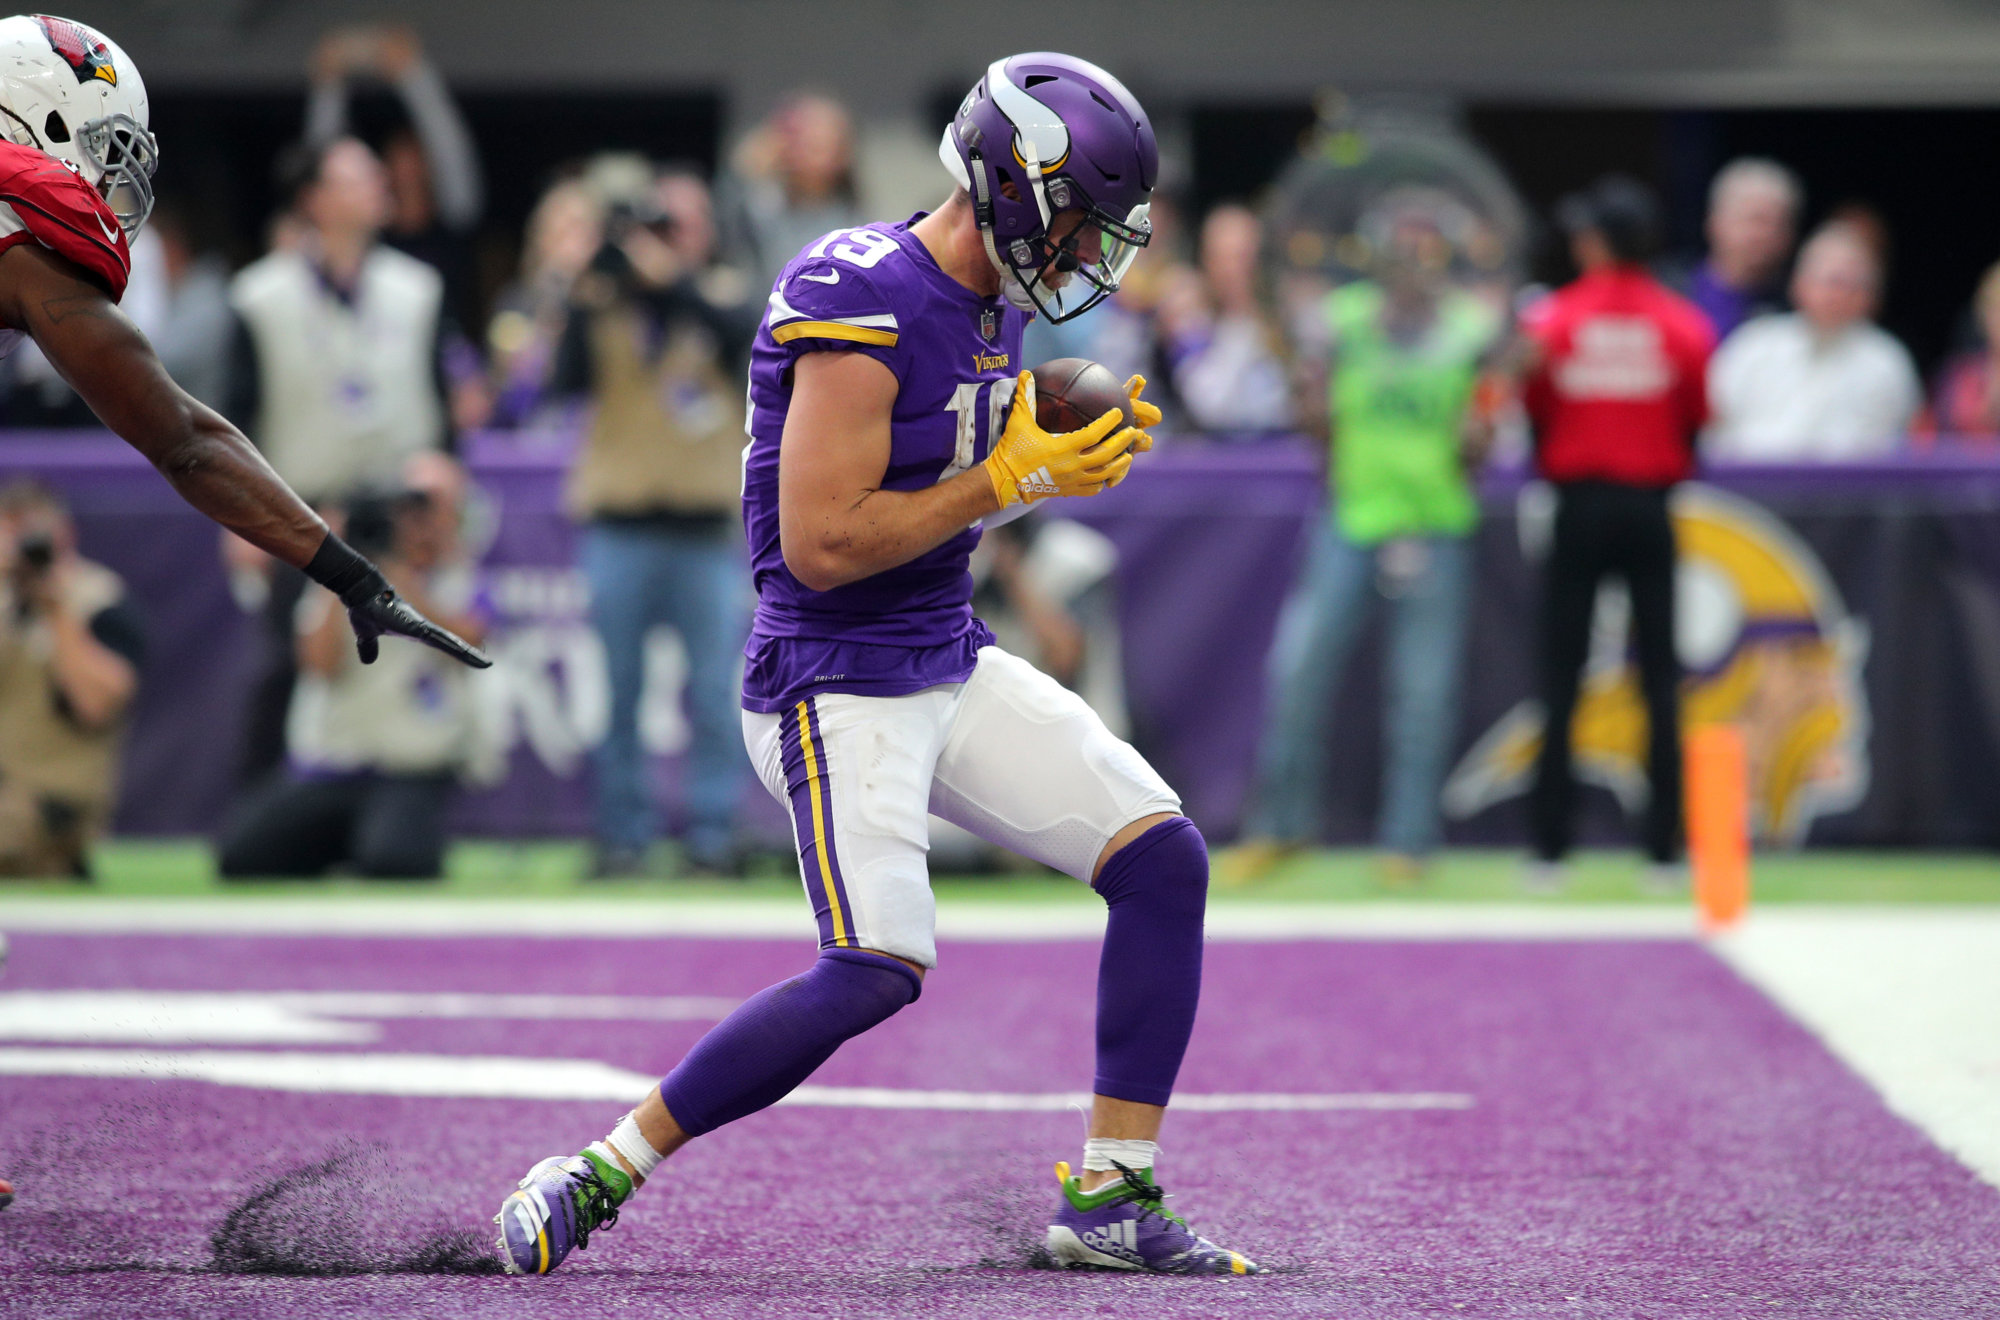 MINNEAPOLIS, MN - OCTOBER 14: Adam Thielen #19 of the Minnesota Vikings catches the ball in the endzone for a touchdown in the third quarter of the game against the Arizona Cardinals at U.S. Bank Stadium on October 14, 2018 in Minneapolis, Minnesota. (Photo by Adam Bettcher/Getty Images)